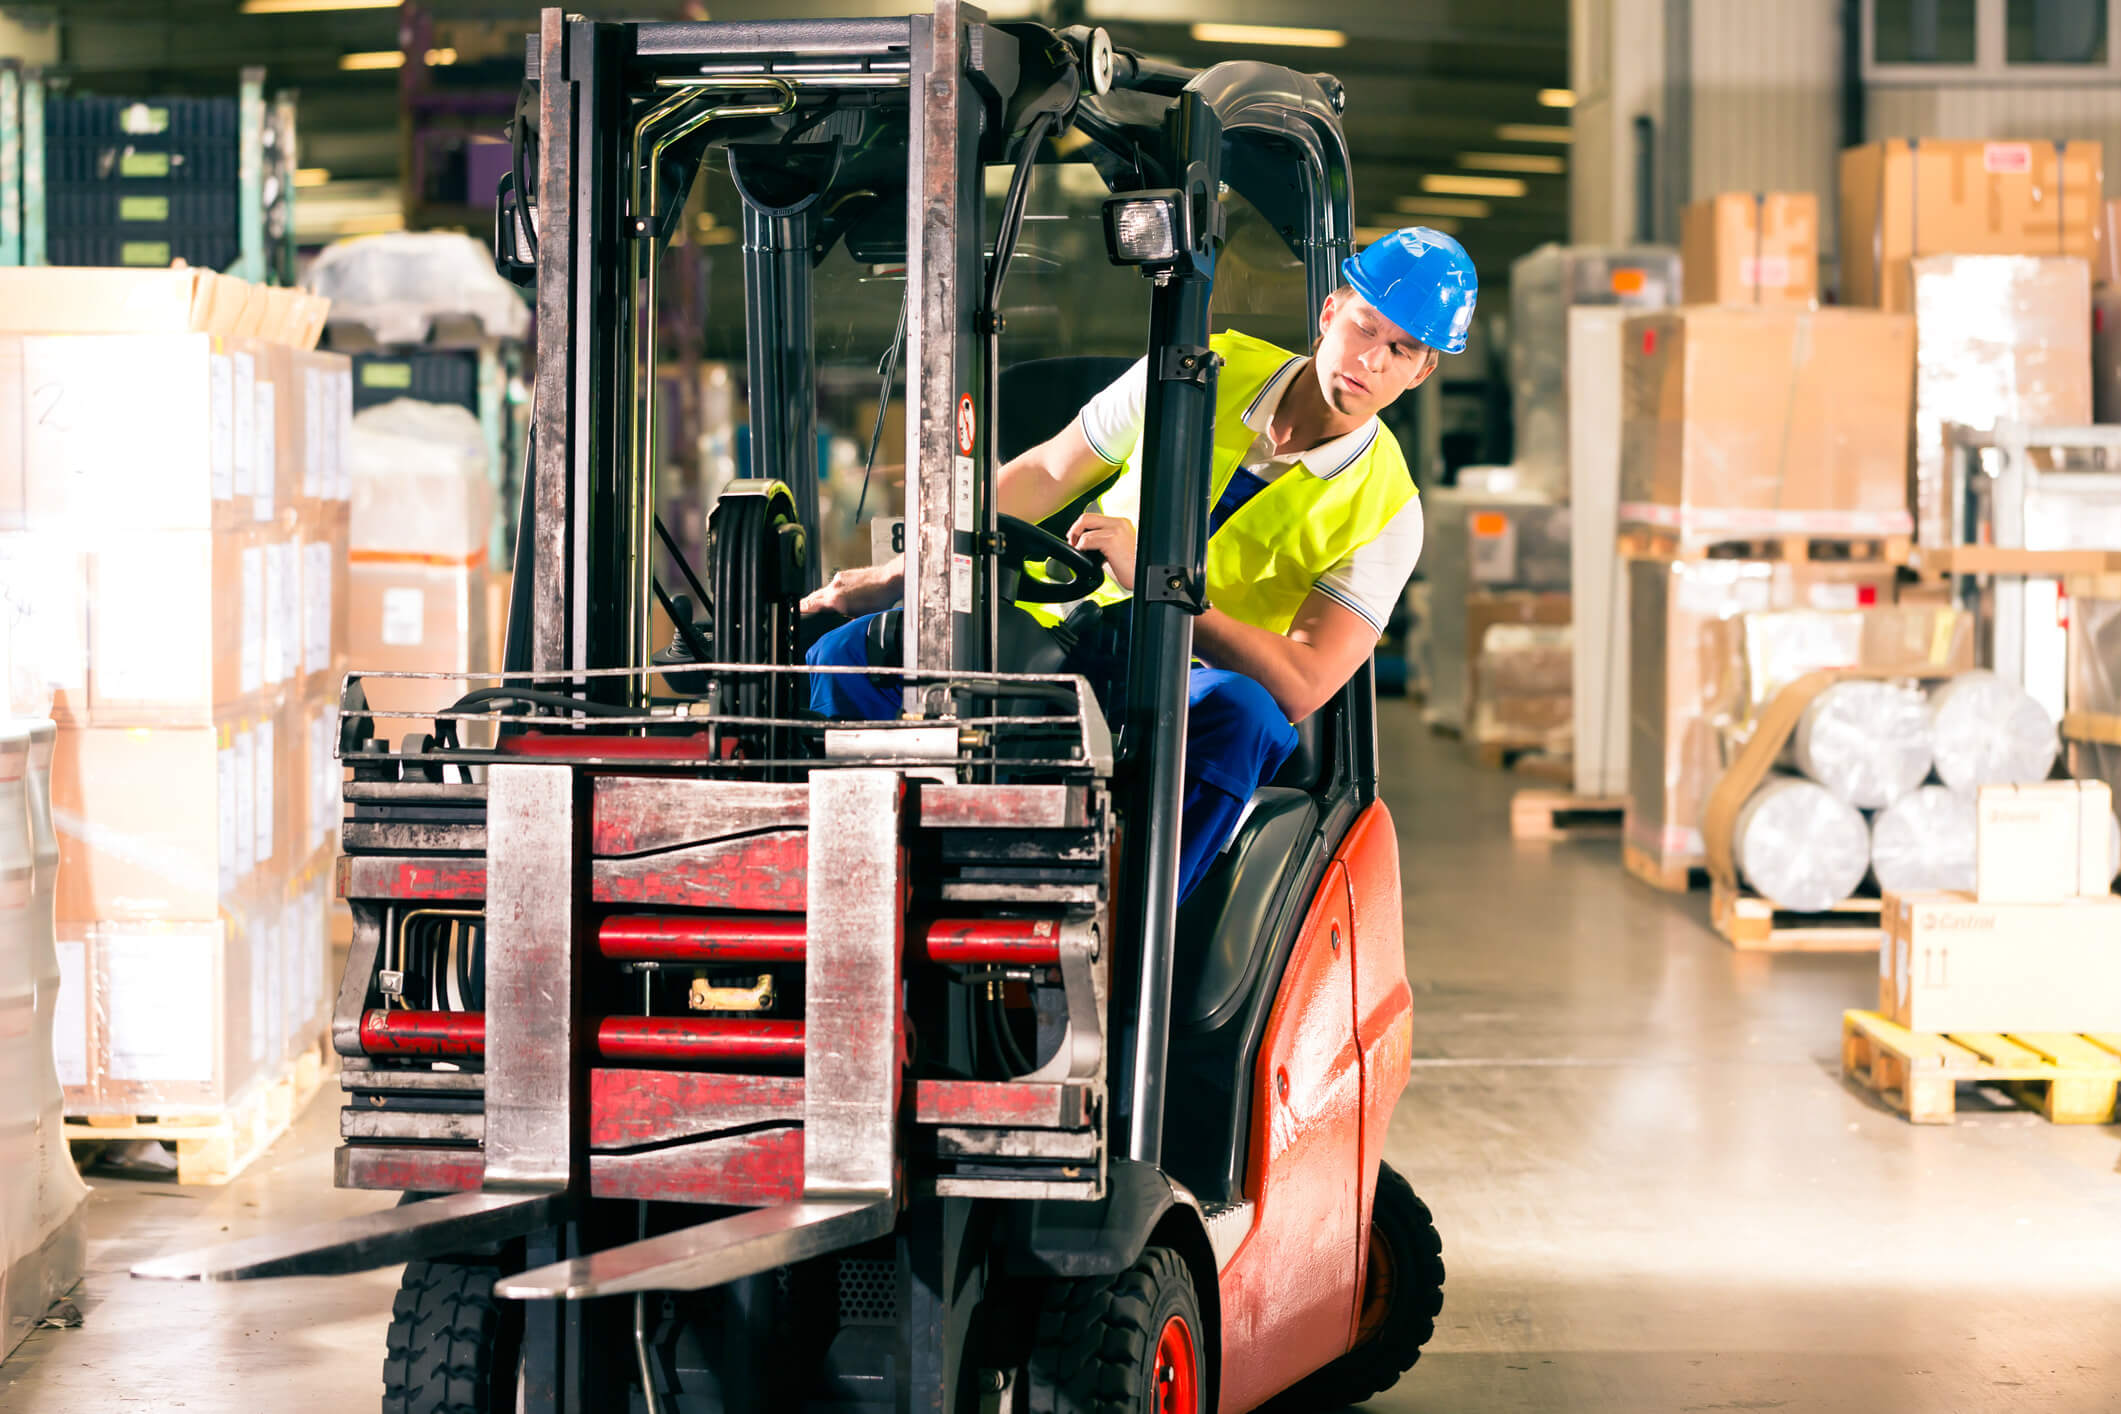 Heat Safety Products for Forklift Operators